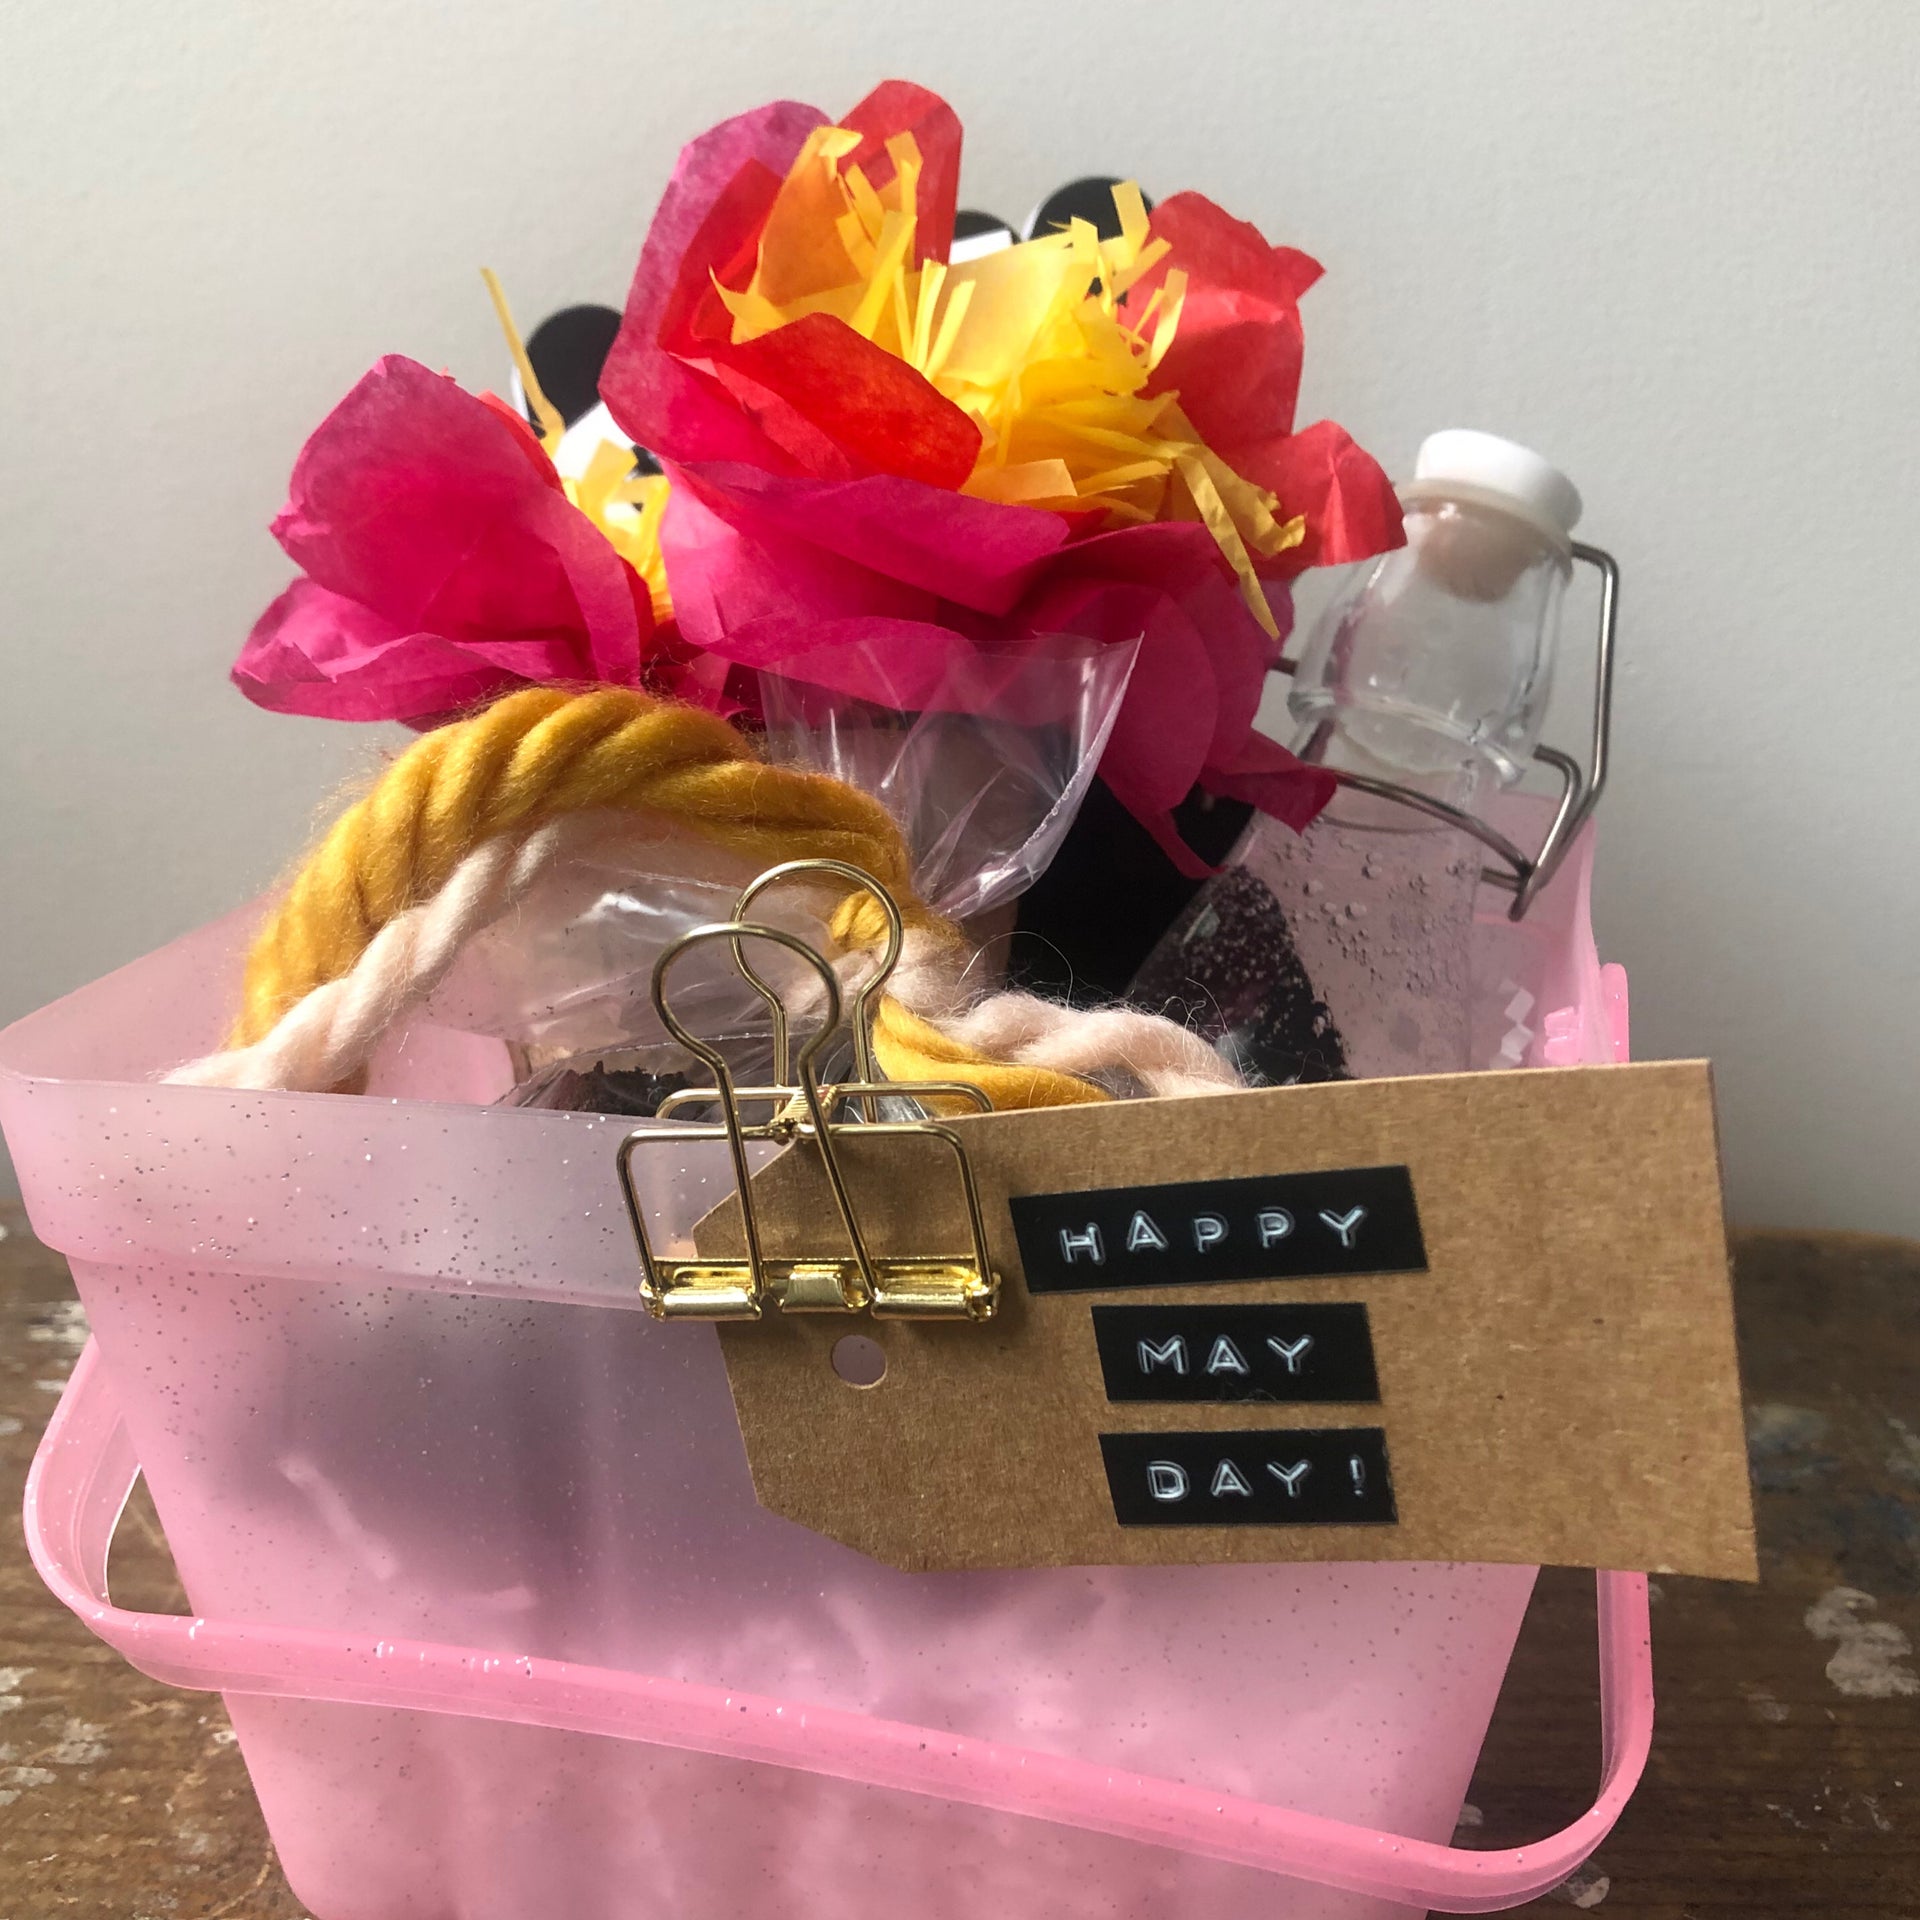 May Day Baskets